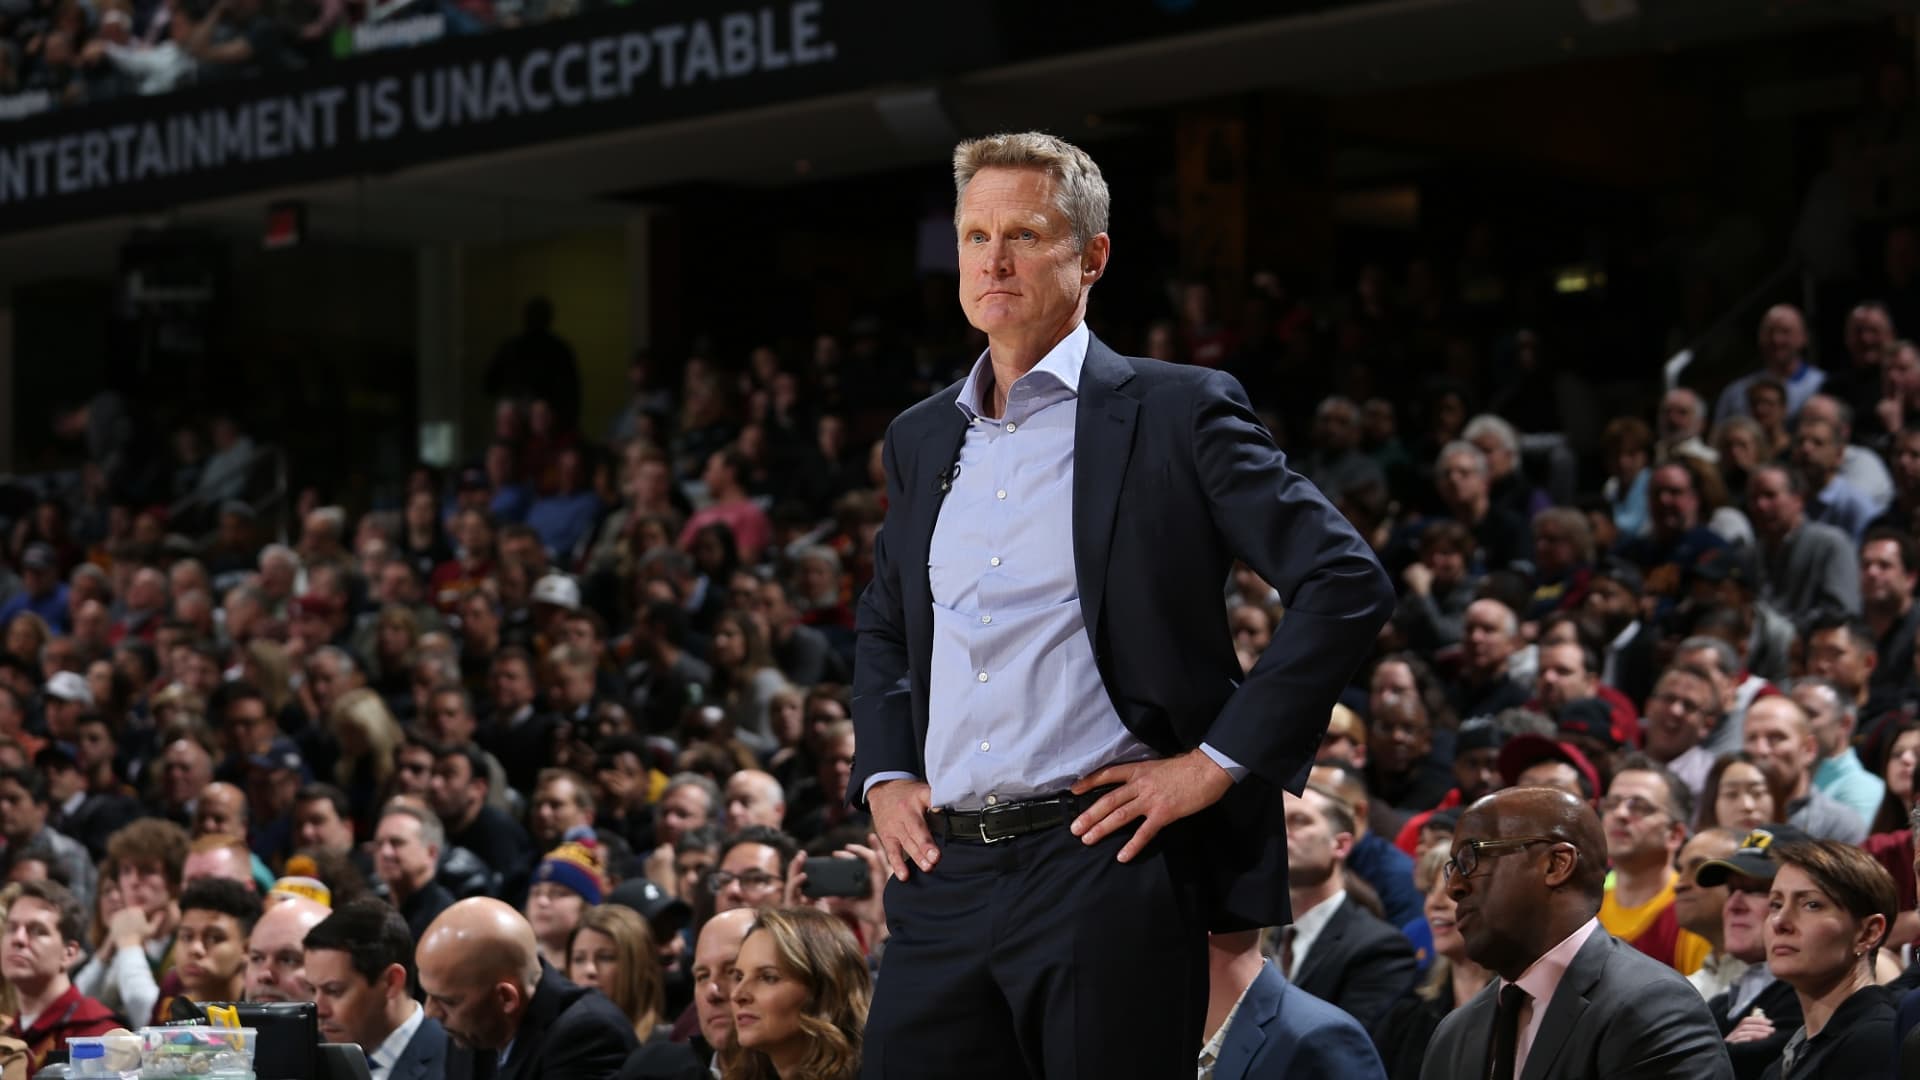 Warriors coach Steve Kerr angrily condemns senators for inaction on guns after Texas school shooting